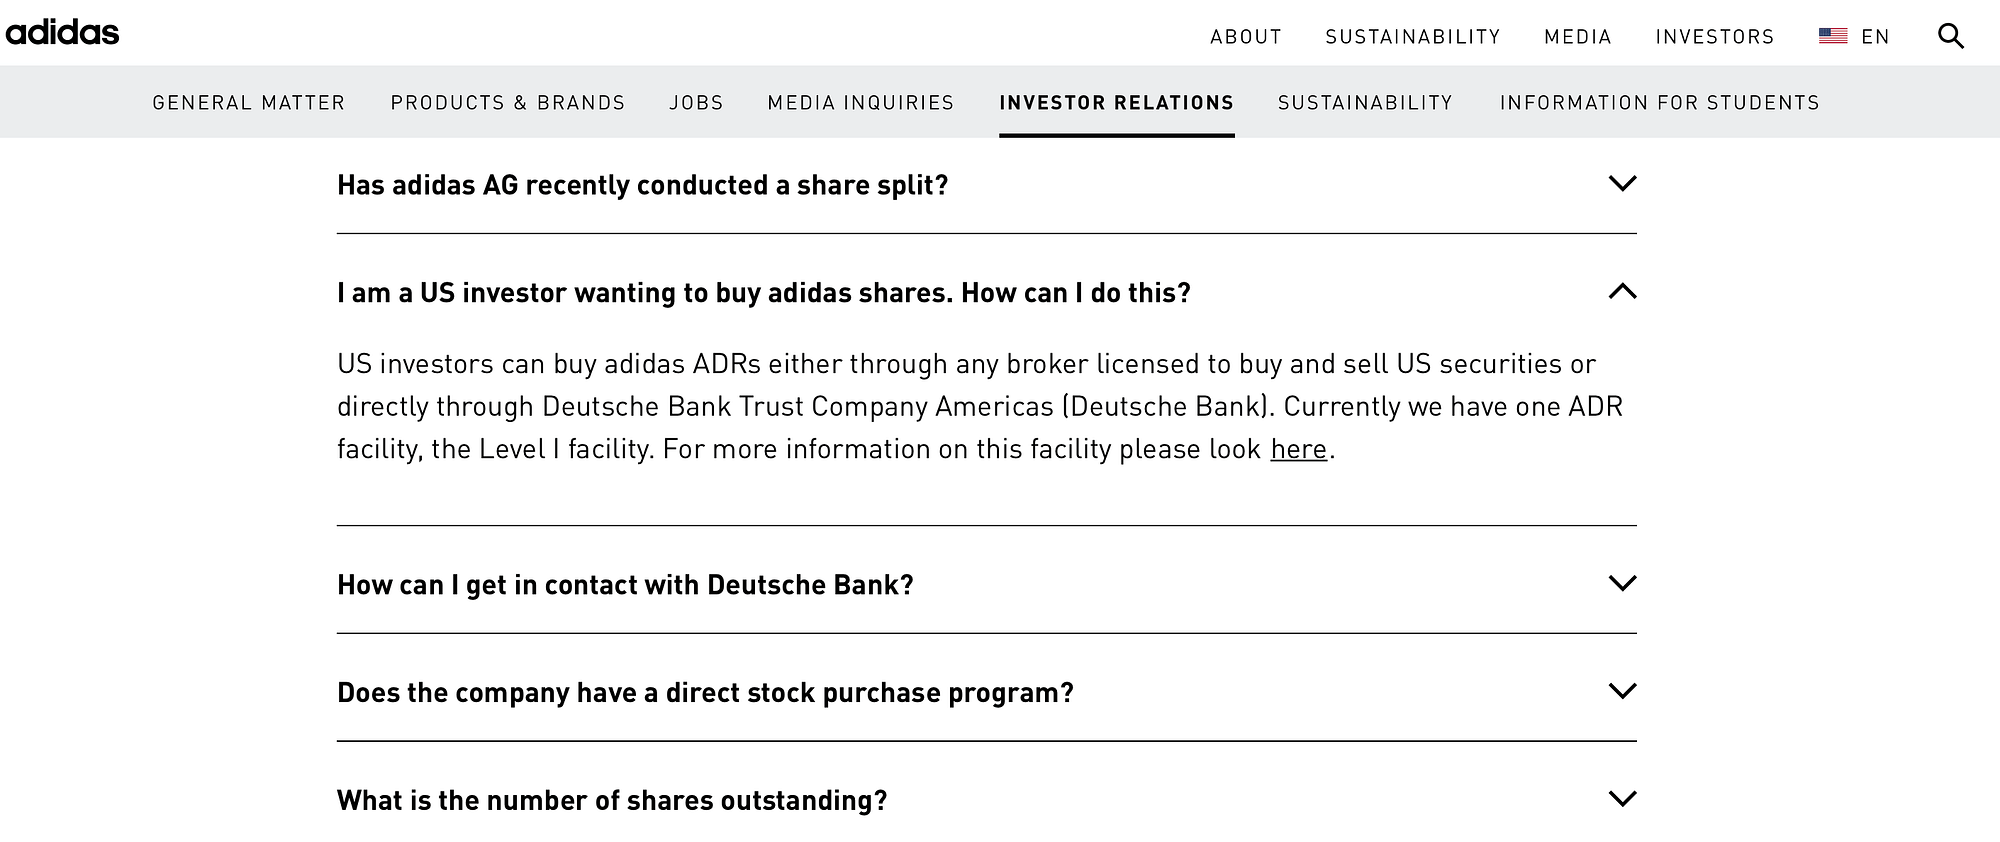 FAQ page exmples: Adidas FAQs, Investor Relations area